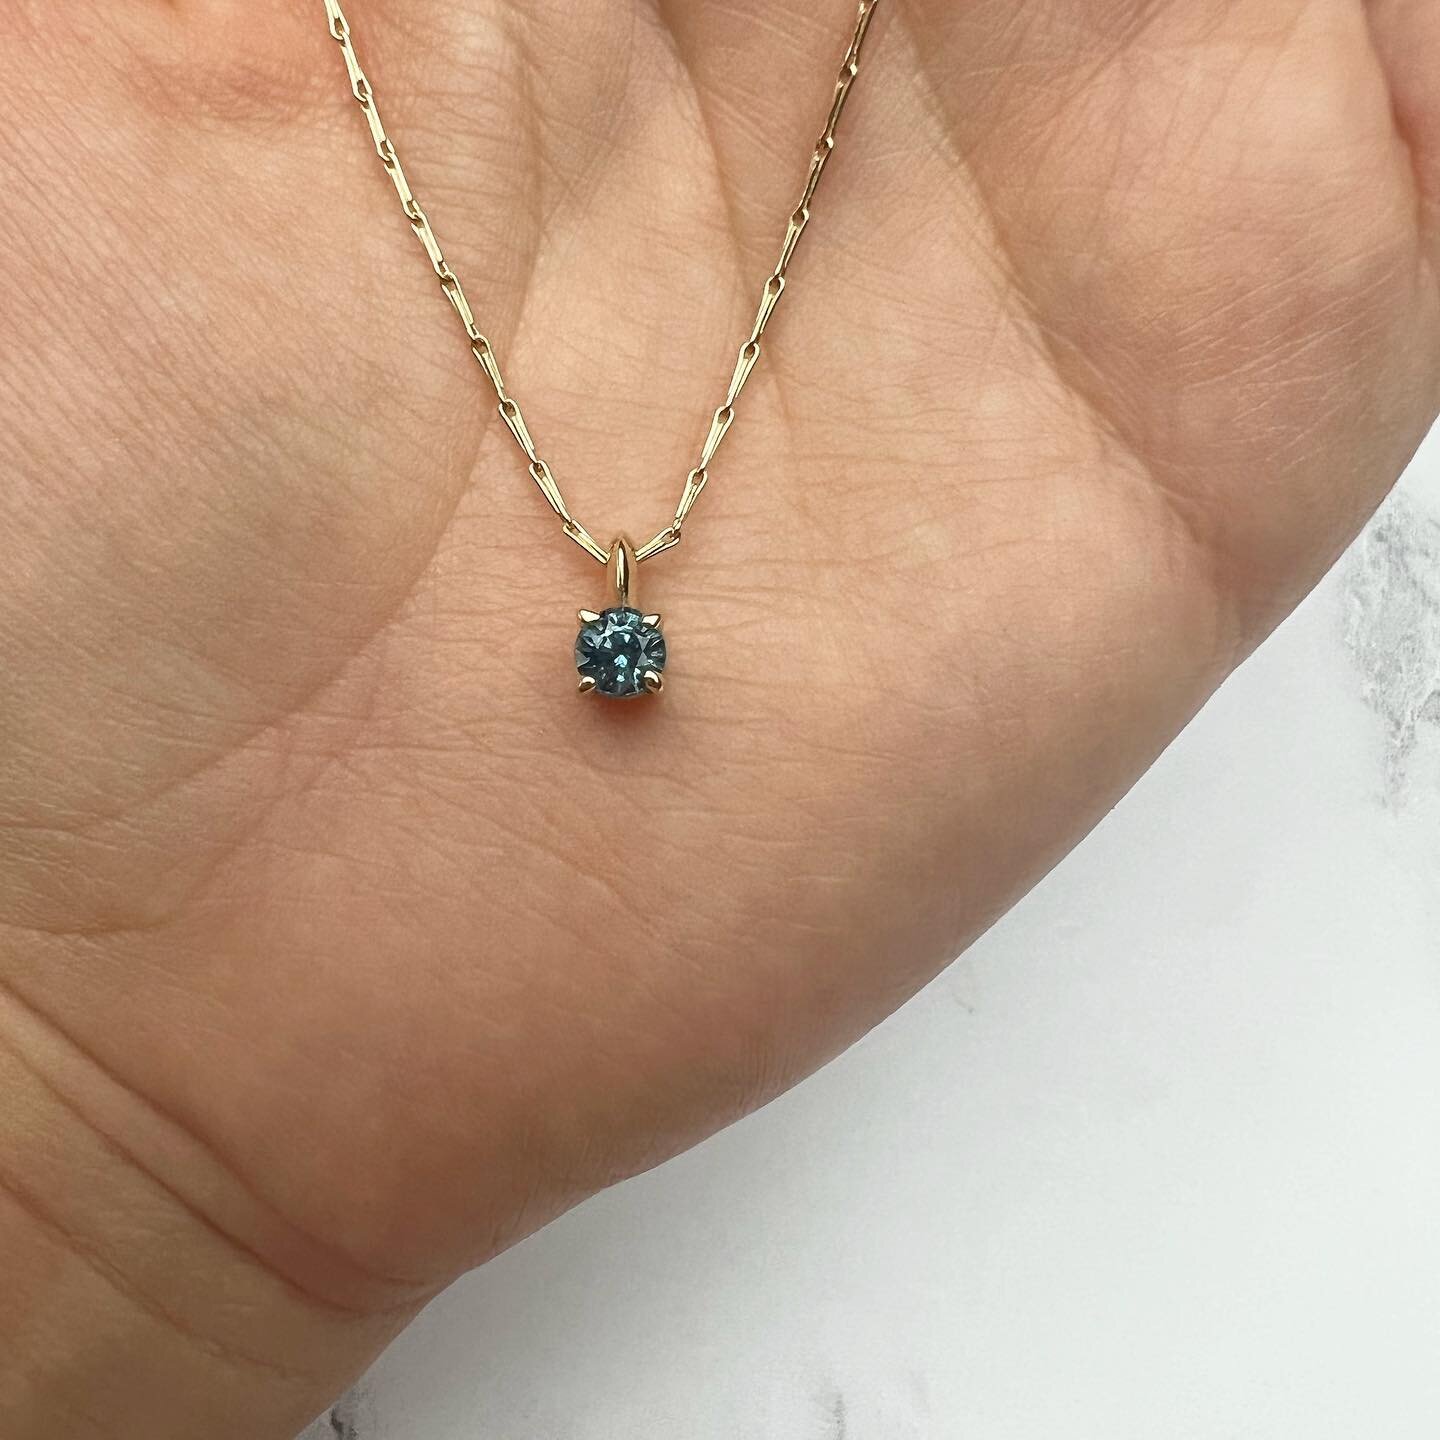 Fresh off the bench 🤩

This gorgeous blue sapphire and gold pendant will soon be live on my website 💫

These pendants also look lovely in diamond, swipe right to see✨Which do you prefer?

#christmasiscoming